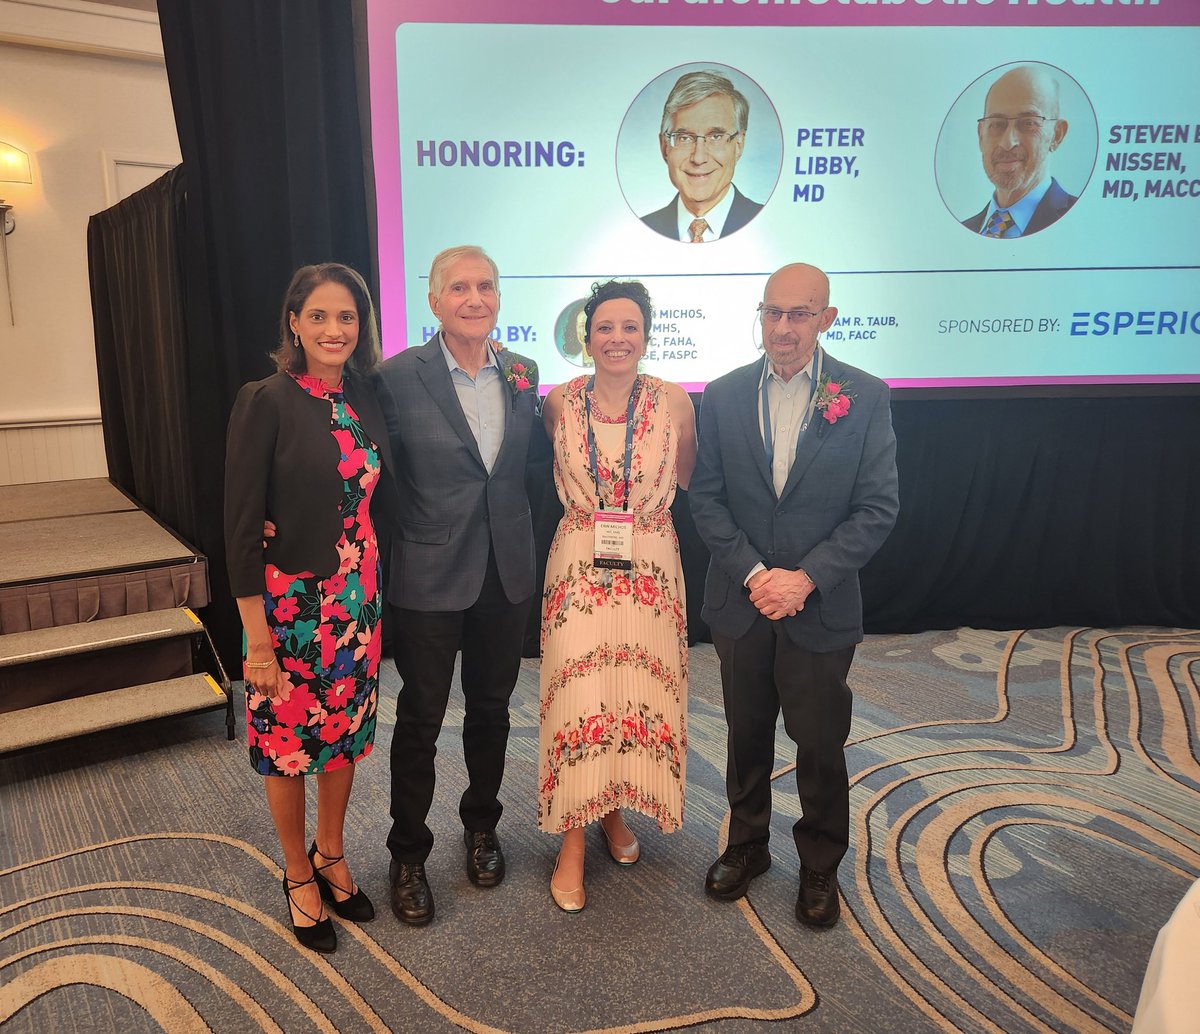 What a great evening to honor two tremendous leaders in cardiometabolic health & sponsors of #WomenInCardiology: Professors Steven Nissen & Peter Libby at the #CMHCWomensMC. @CMHC_CME . Thank you also to @EsperionInc for sponsoring the welcome dinner for meeting attendees. ❤️